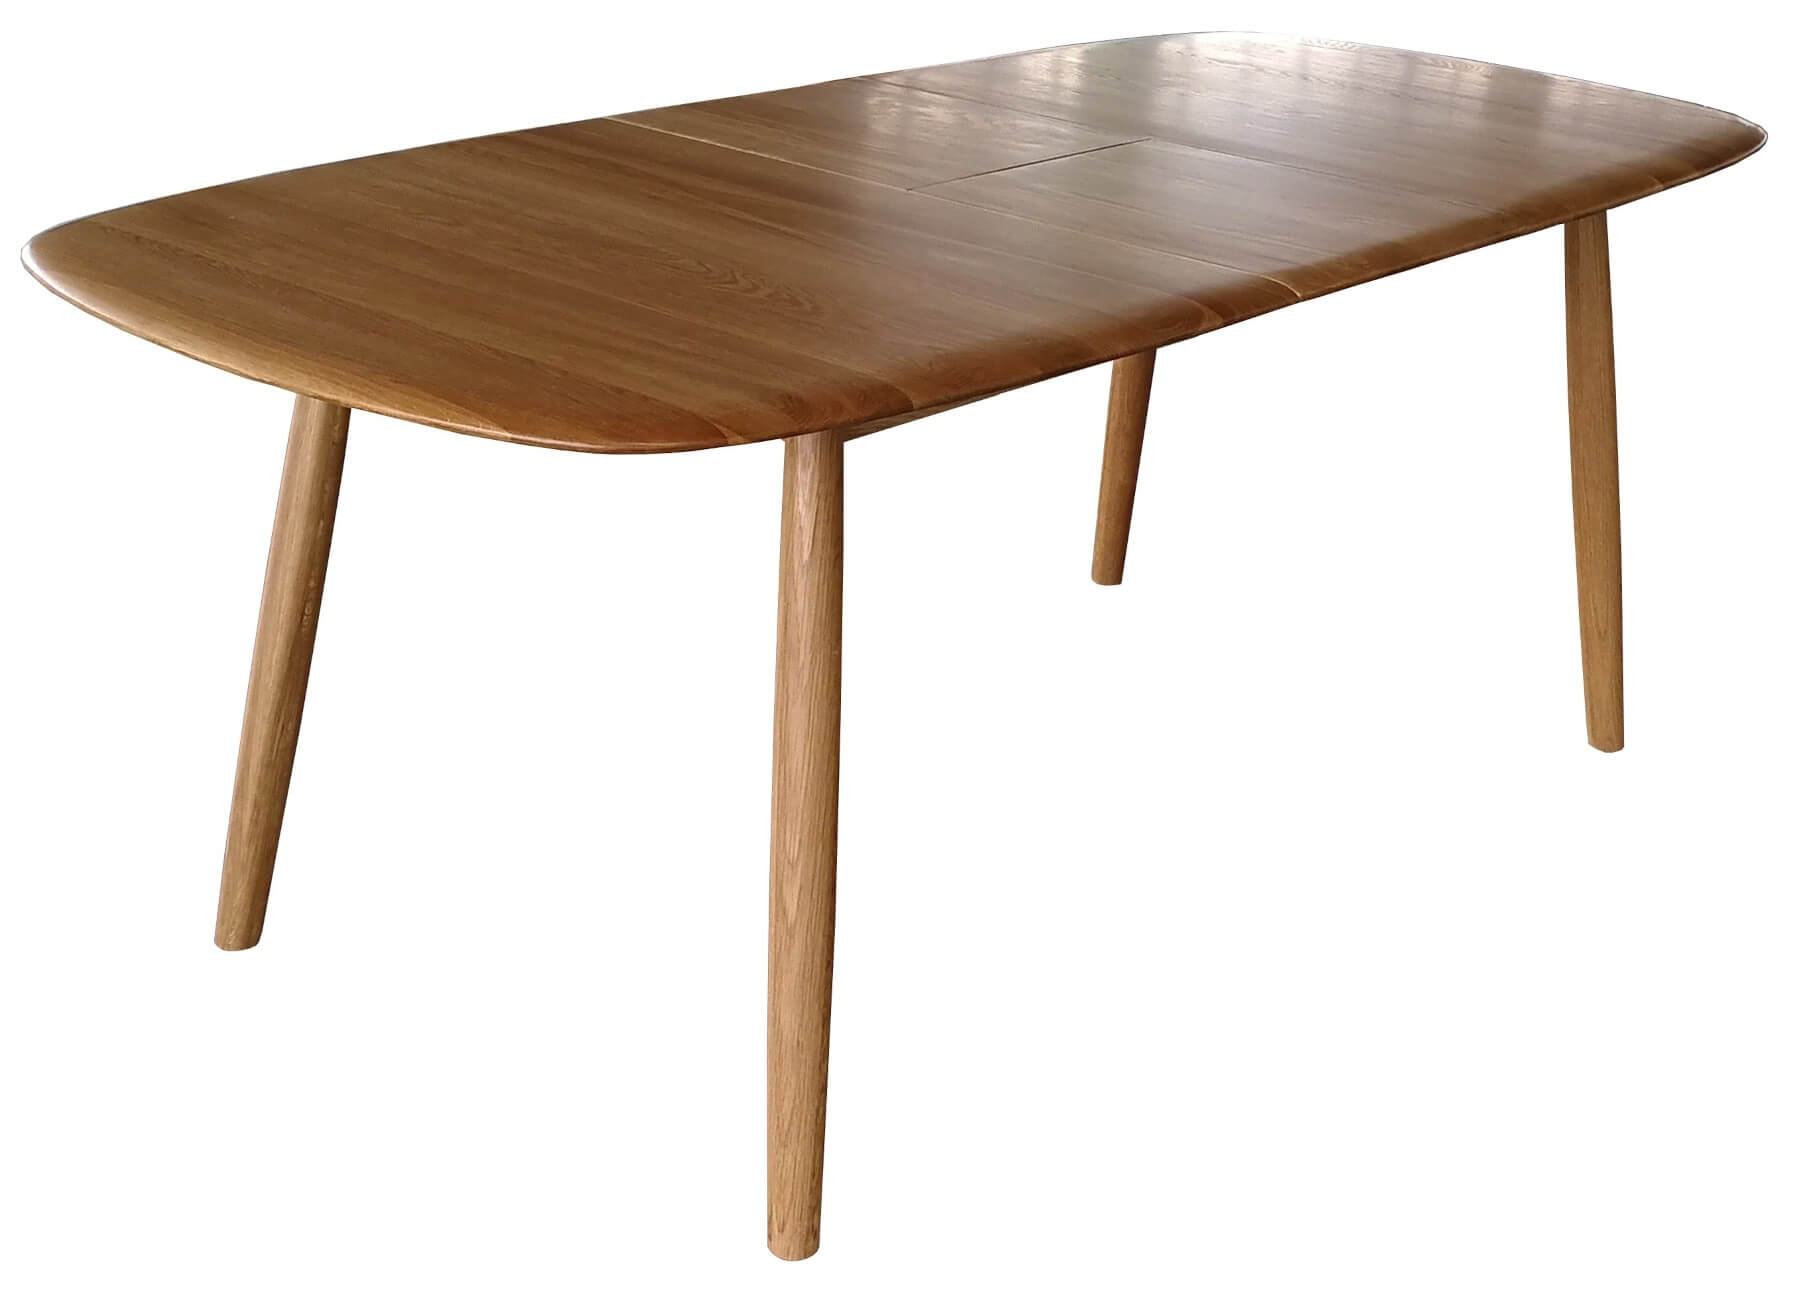 Showing image for Bergen extending dining table